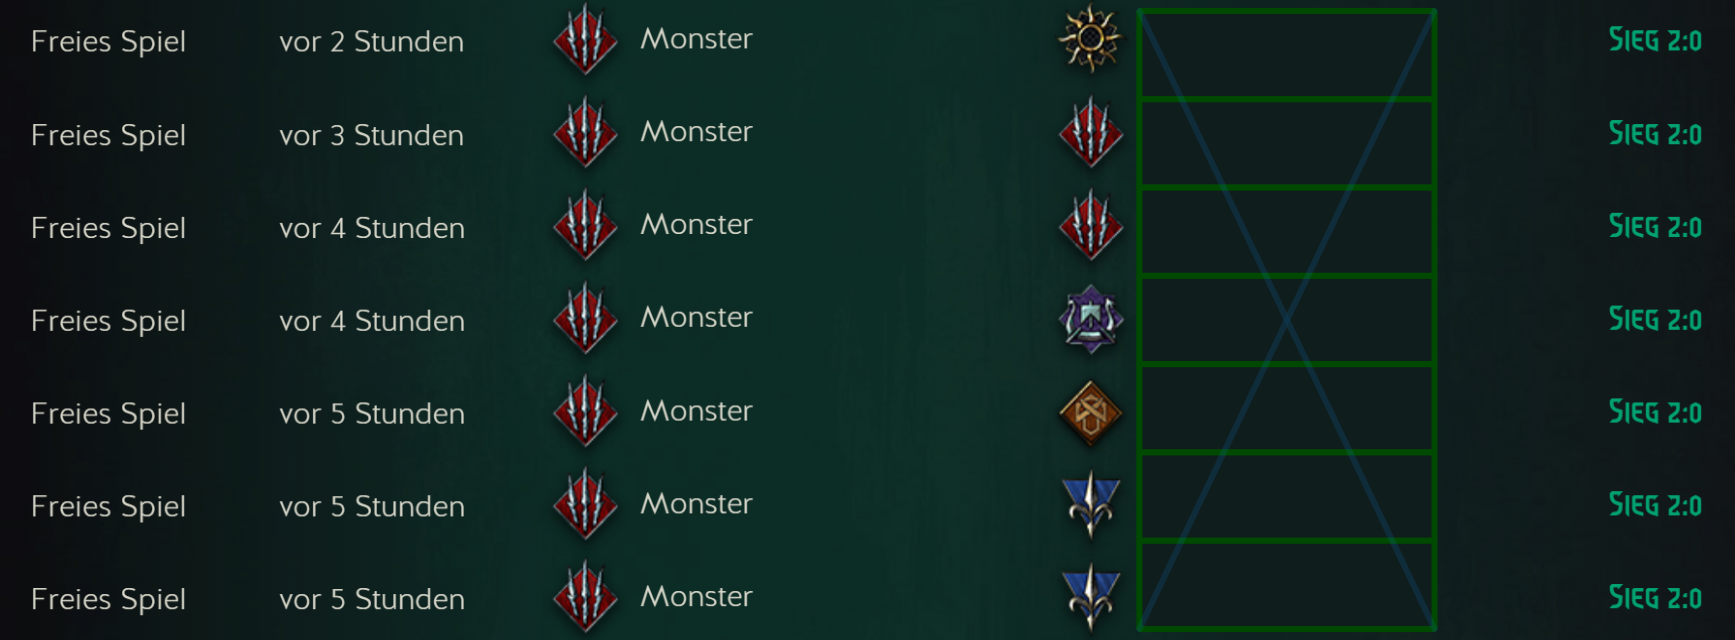 Mosters OP.png